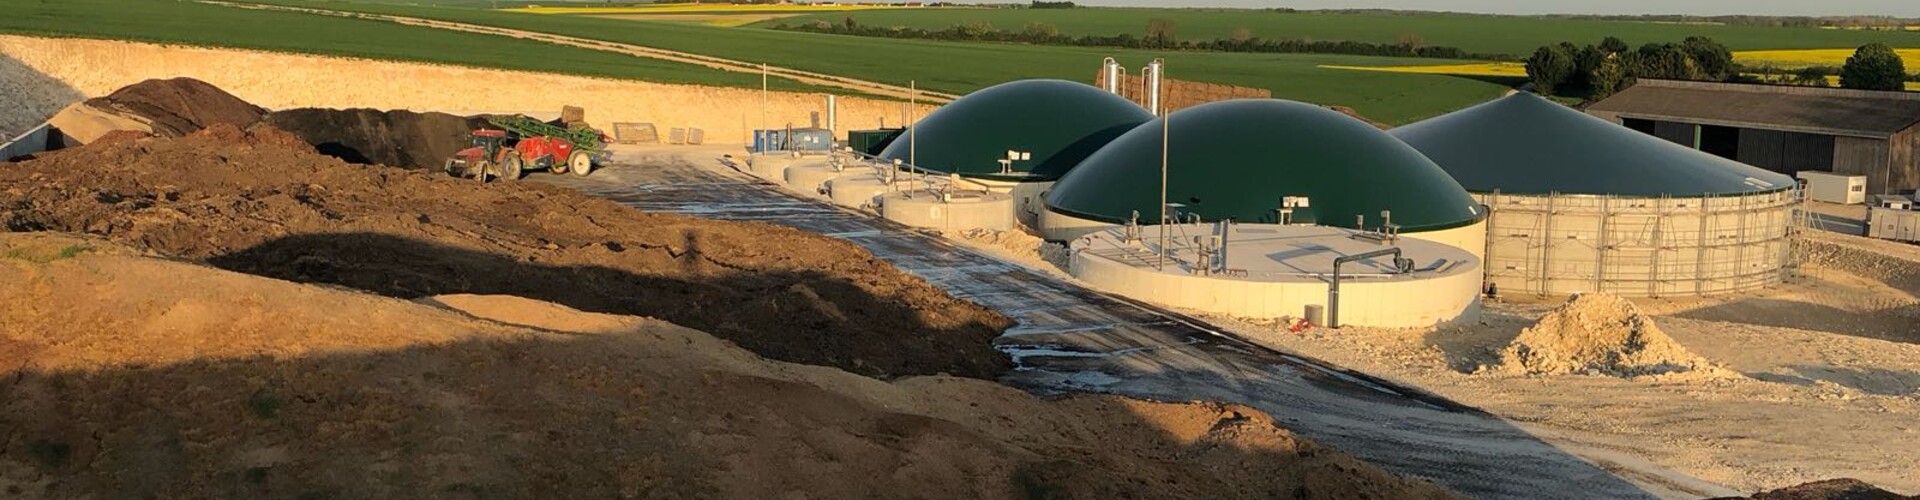 Biogas installation Bourges, France